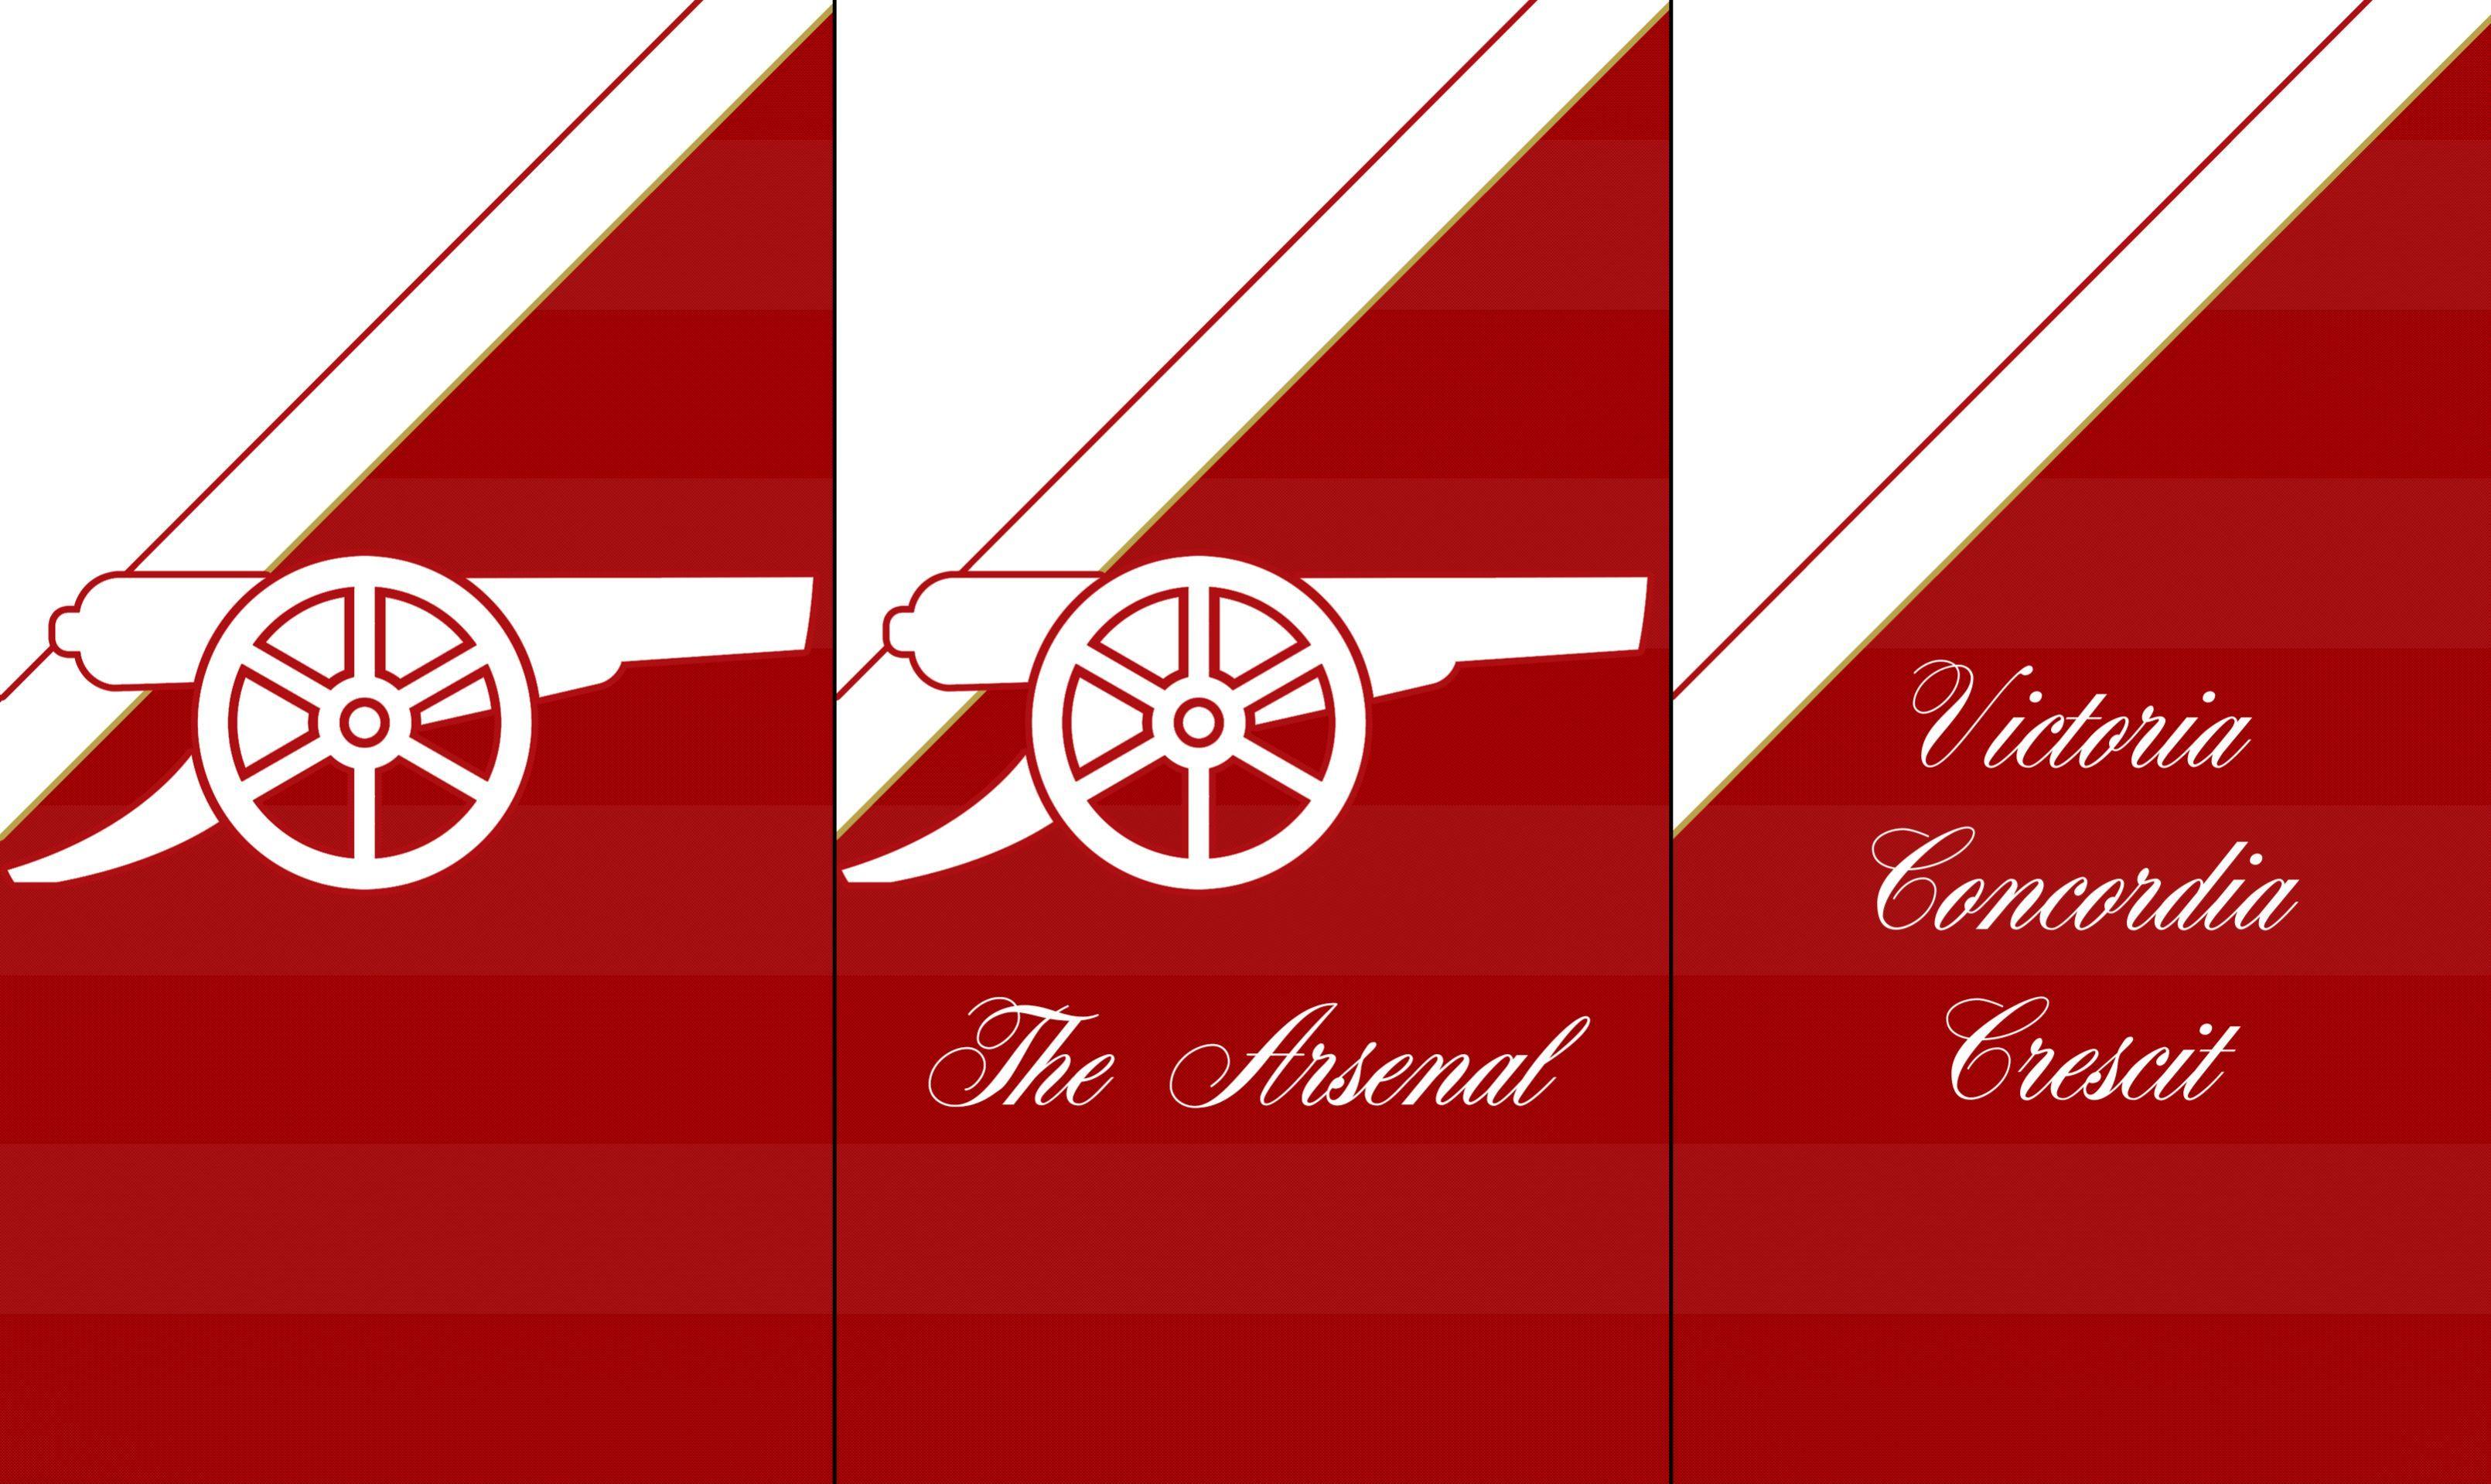 I made some Arsenal Phone Wallpaper inspired by the new kit. High